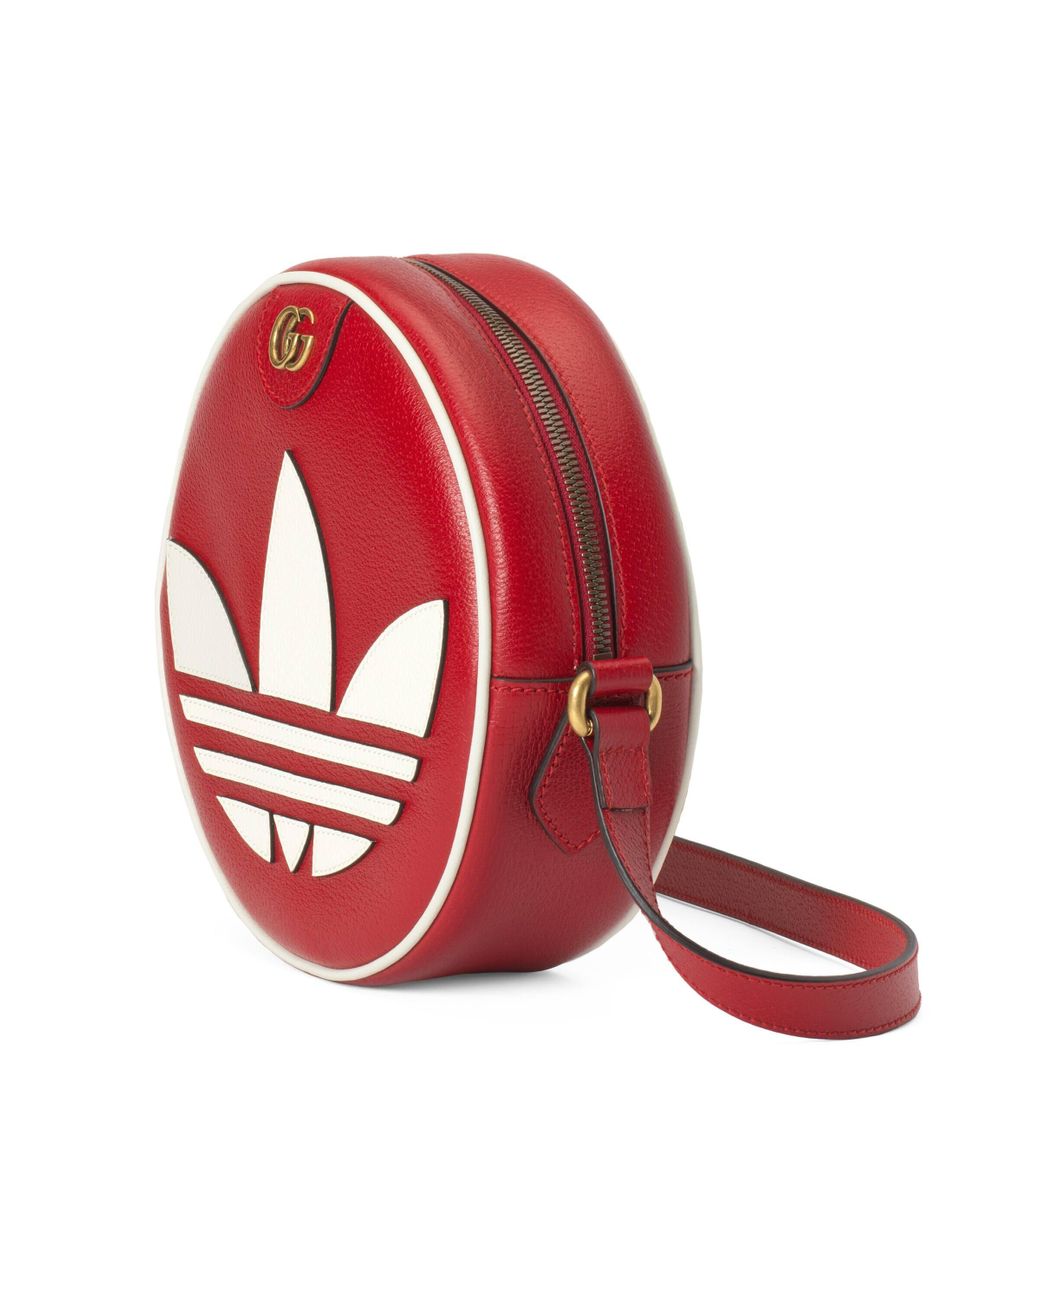 Gucci Adidas X Ophidia Shoulder Bag in Red | Lyst